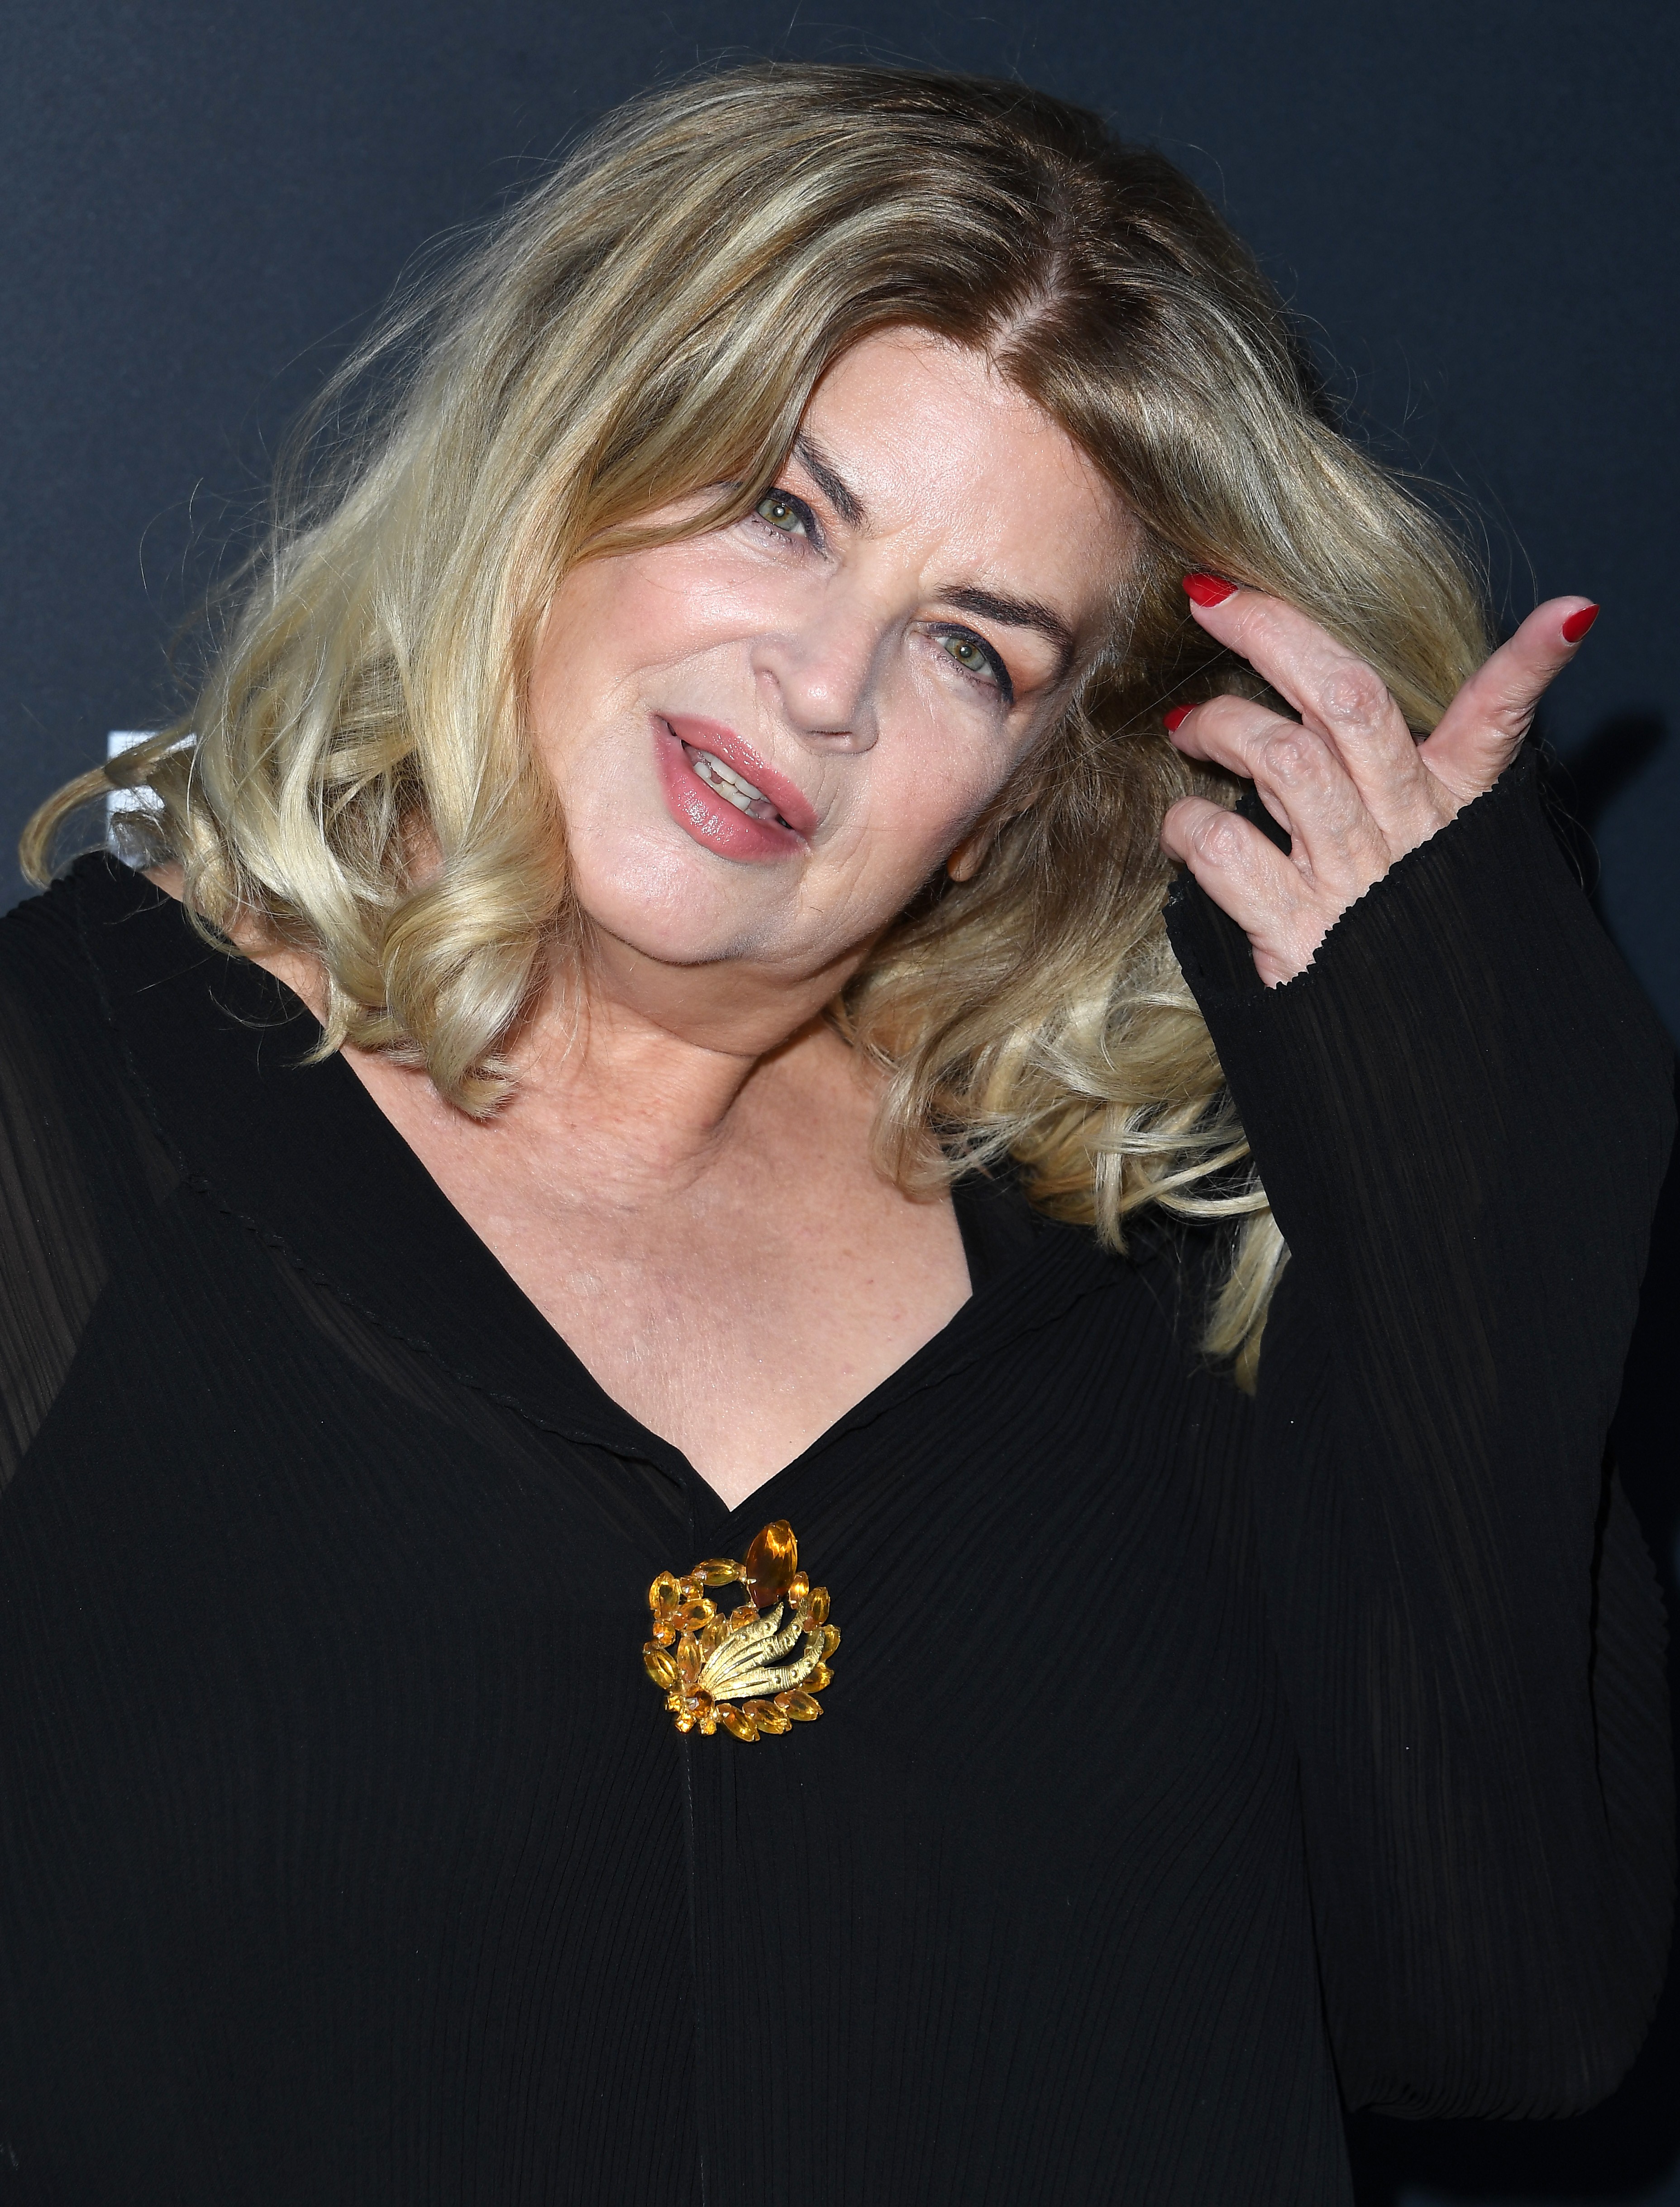 HOLLYWOOD, CALIFORNIA - AUGUST 22: Kirstie Alley arrives at the Premiere Of Quiver Distribution's "The Fanatic" at the Egyptian Theatre on August 22, 2019 in Hollywood, California. (Photo by Steve Granitz/WireImage,) (Foto: WireImage,)